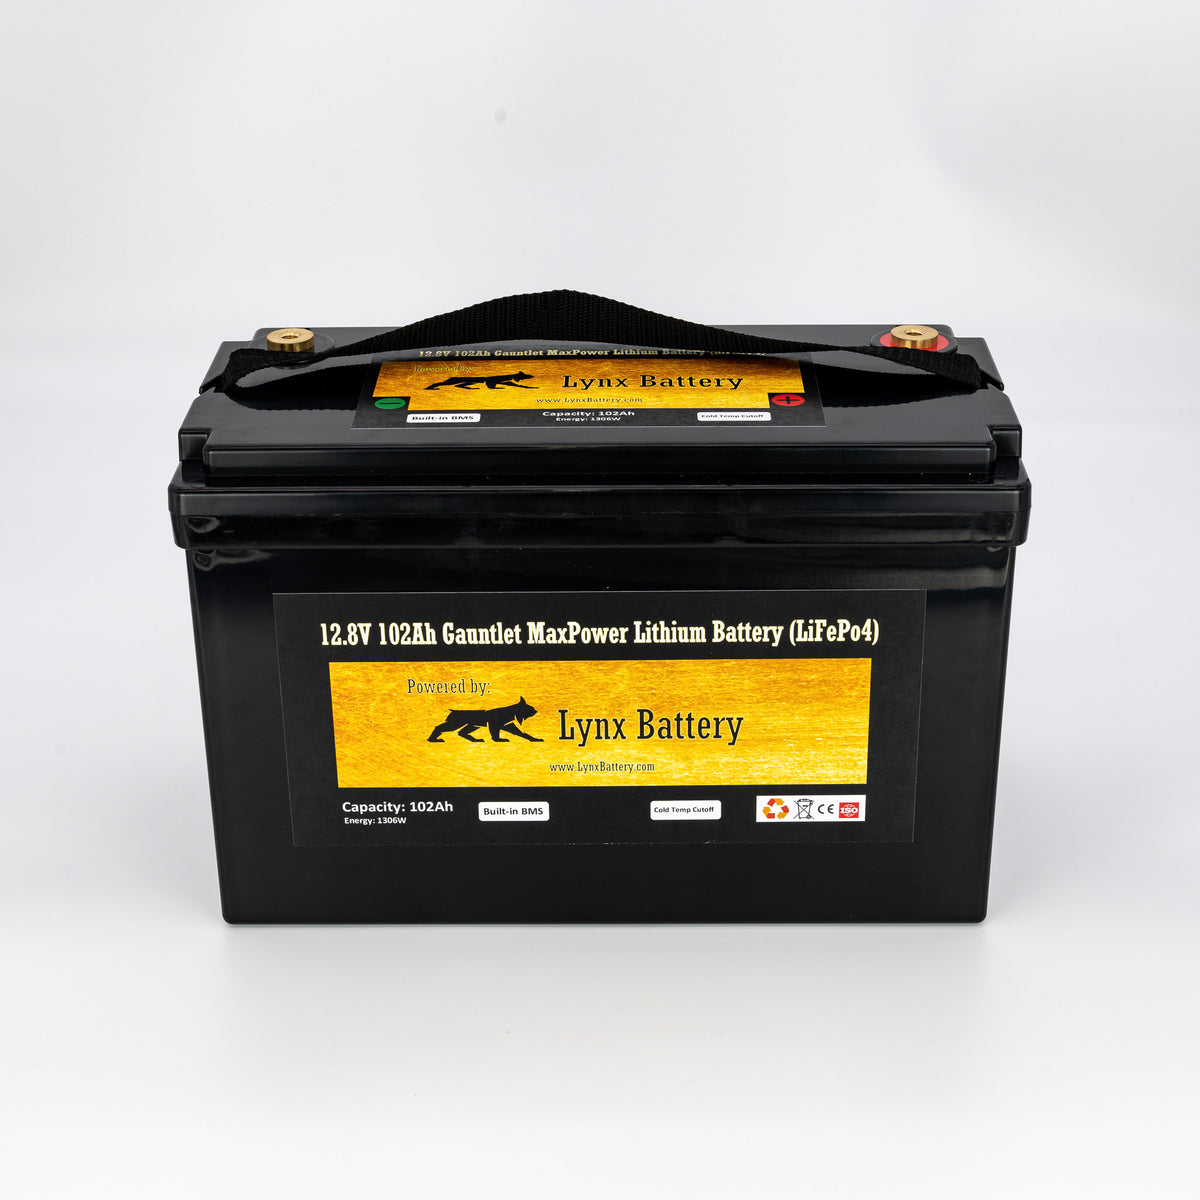 Lynx Battery 12V 100Ah Lithium Iron Phosphate LiFePO4 Deep Cycle Battery Built-in BMS with Cold Cut-Off Switch Perfect for Solar, RV, Marine, Golf Cart, Van & Off-Grid Applications